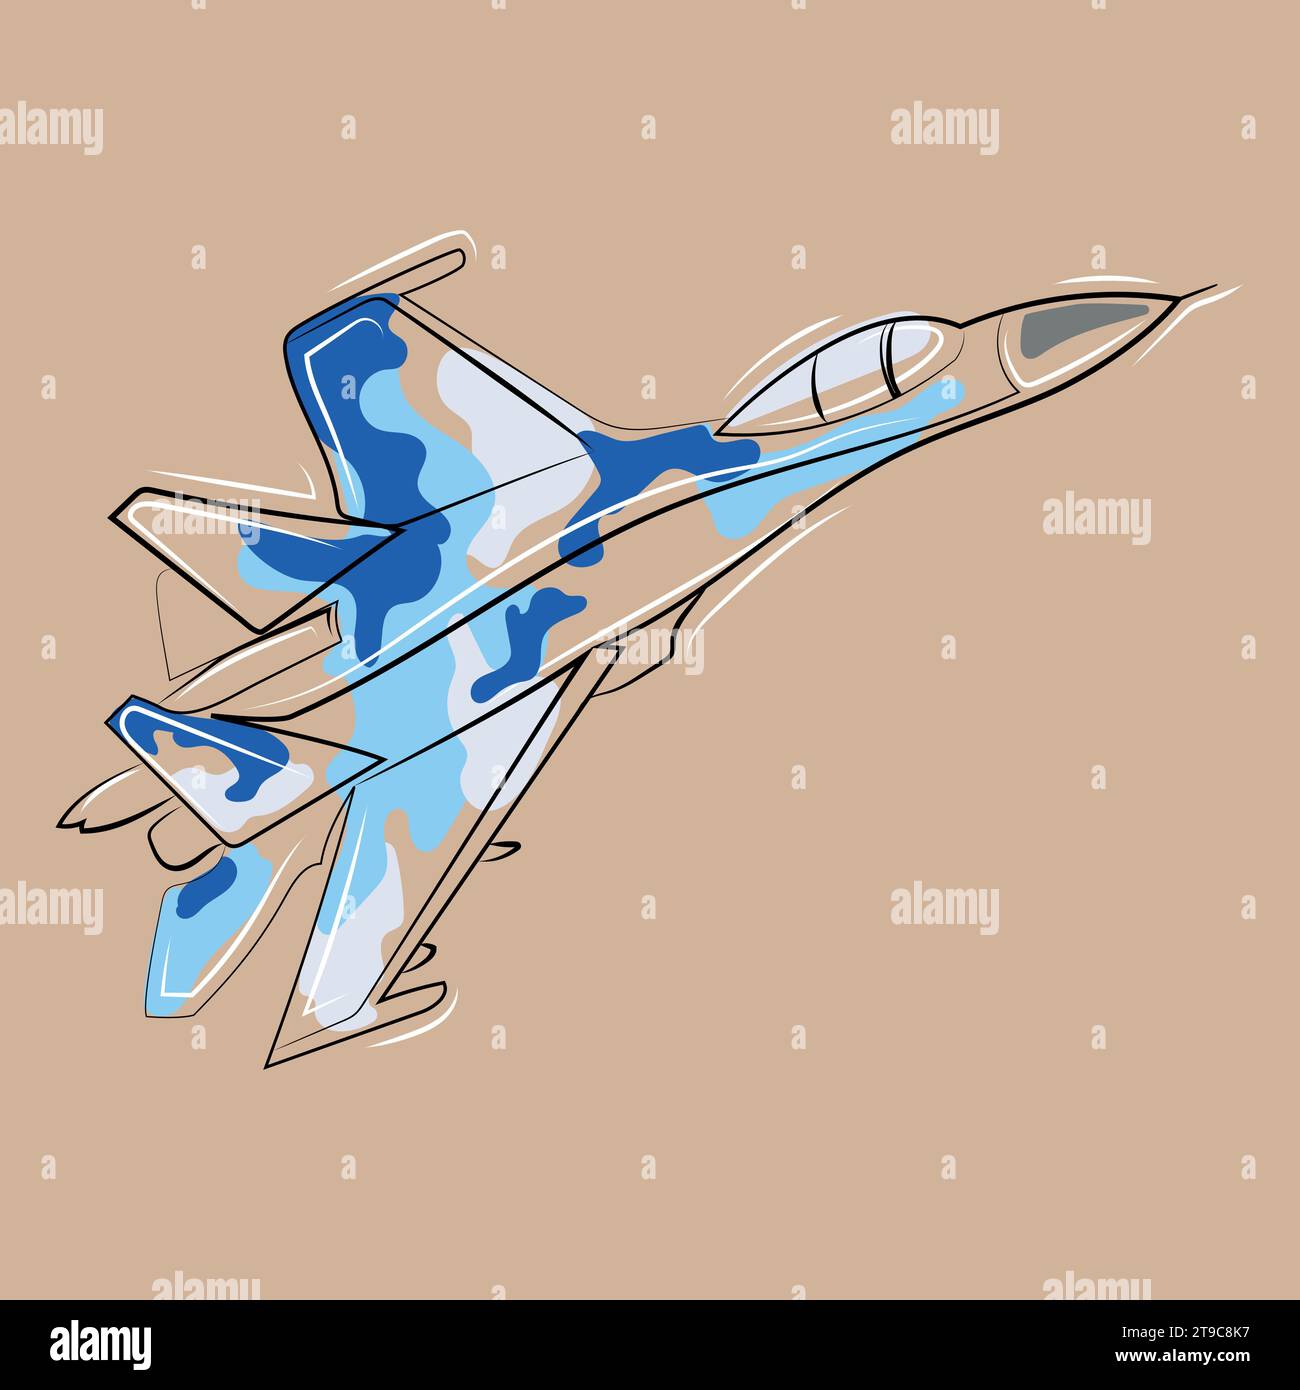 Jet fighter Sukhoi Su-27 vector illustration.Fighter aircraft flying in the sky line drawing in modern minmal art style,poster,print,logo,icon. Stock Vector